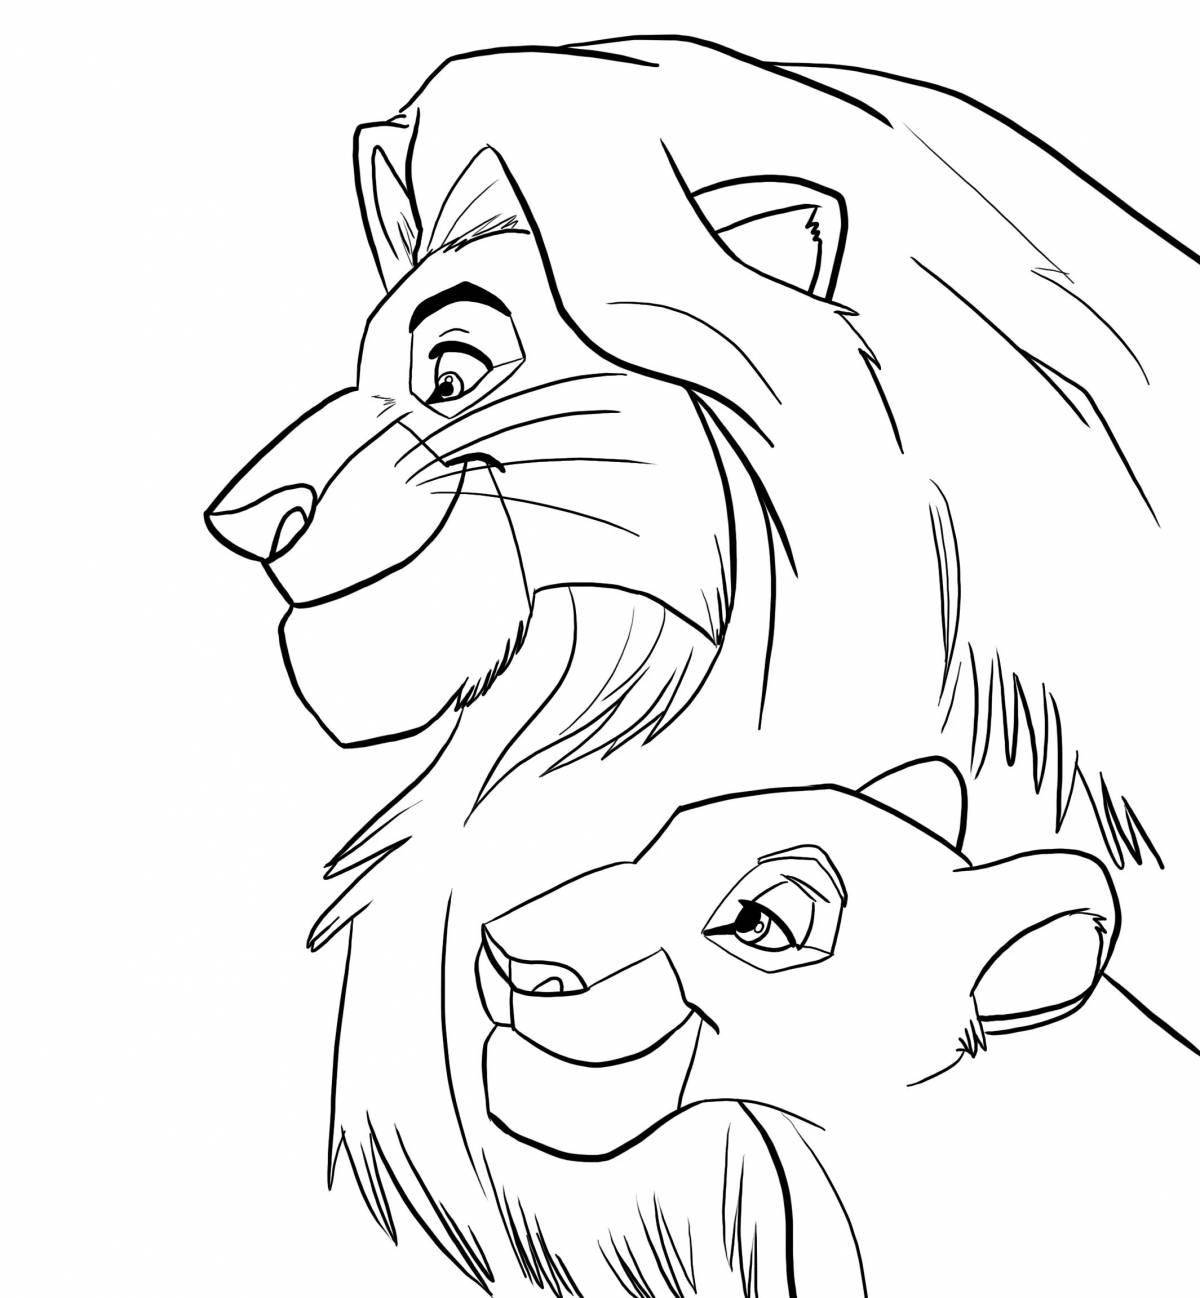 Simba's colorful coloring page